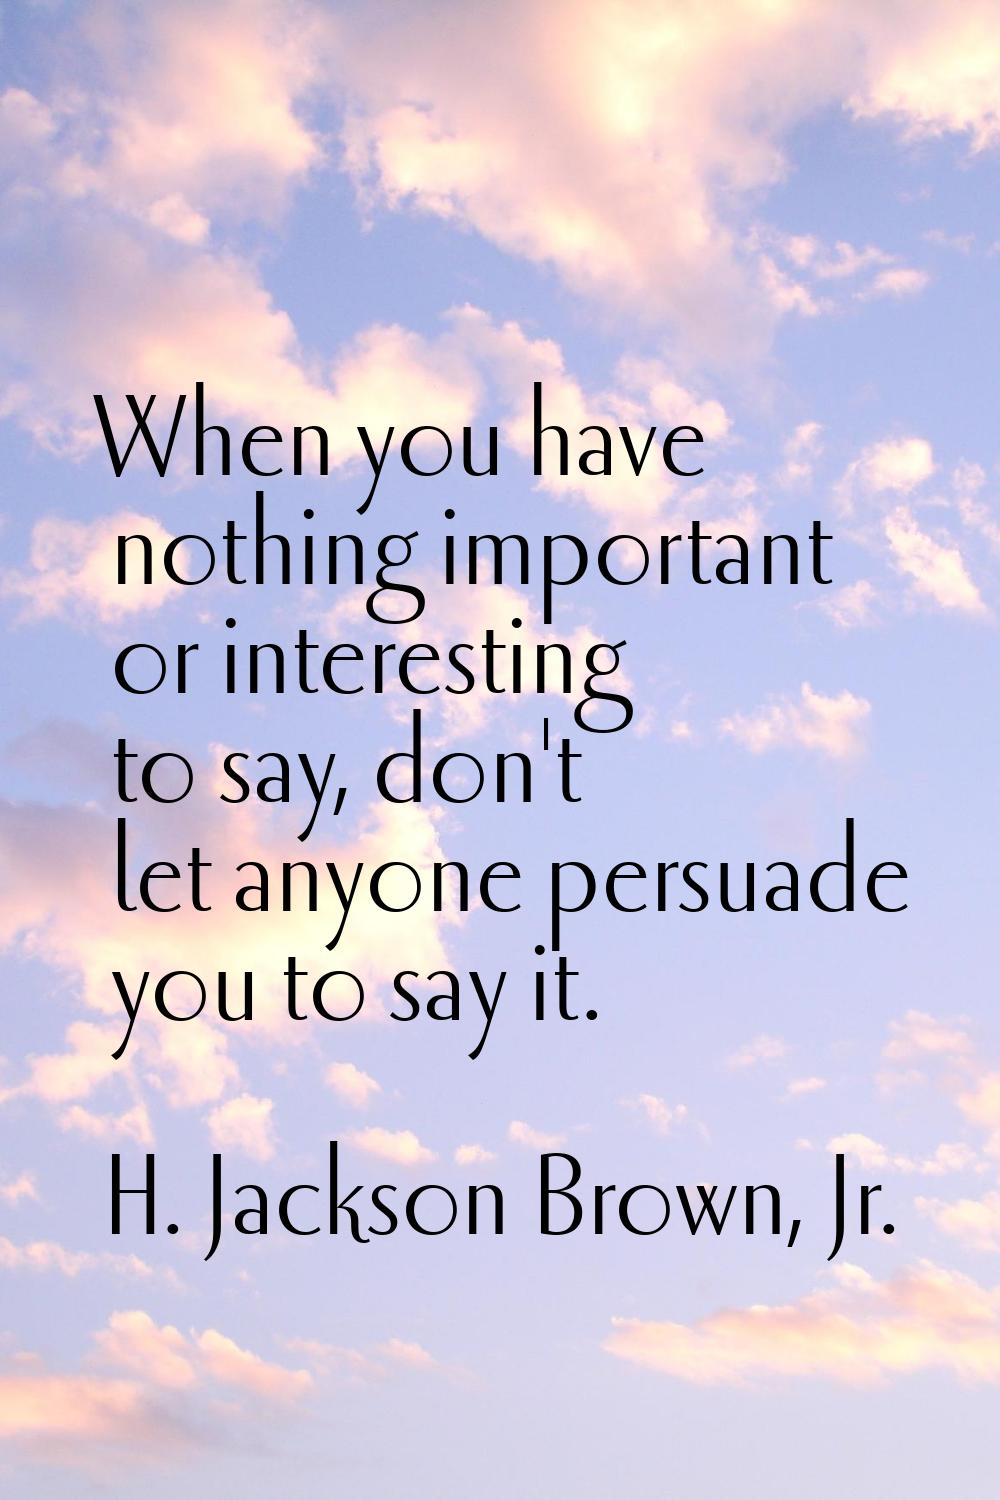 When you have nothing important or interesting to say, don't let anyone persuade you to say it.